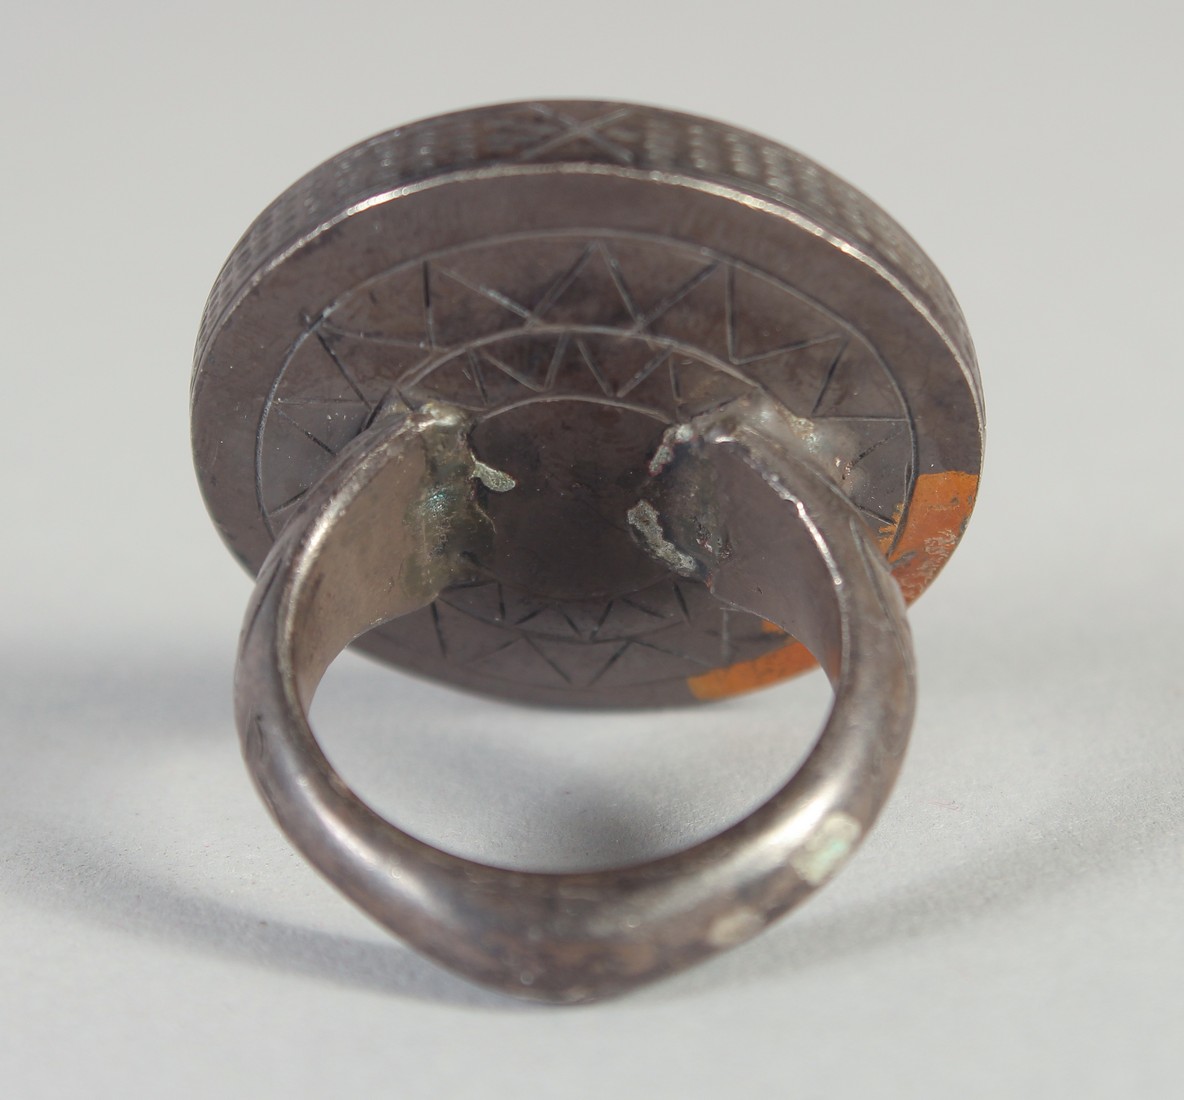 A FINE LARGE PERSIAN ENGRAVED AGATE / CARNELIAN RING. - Image 4 of 4